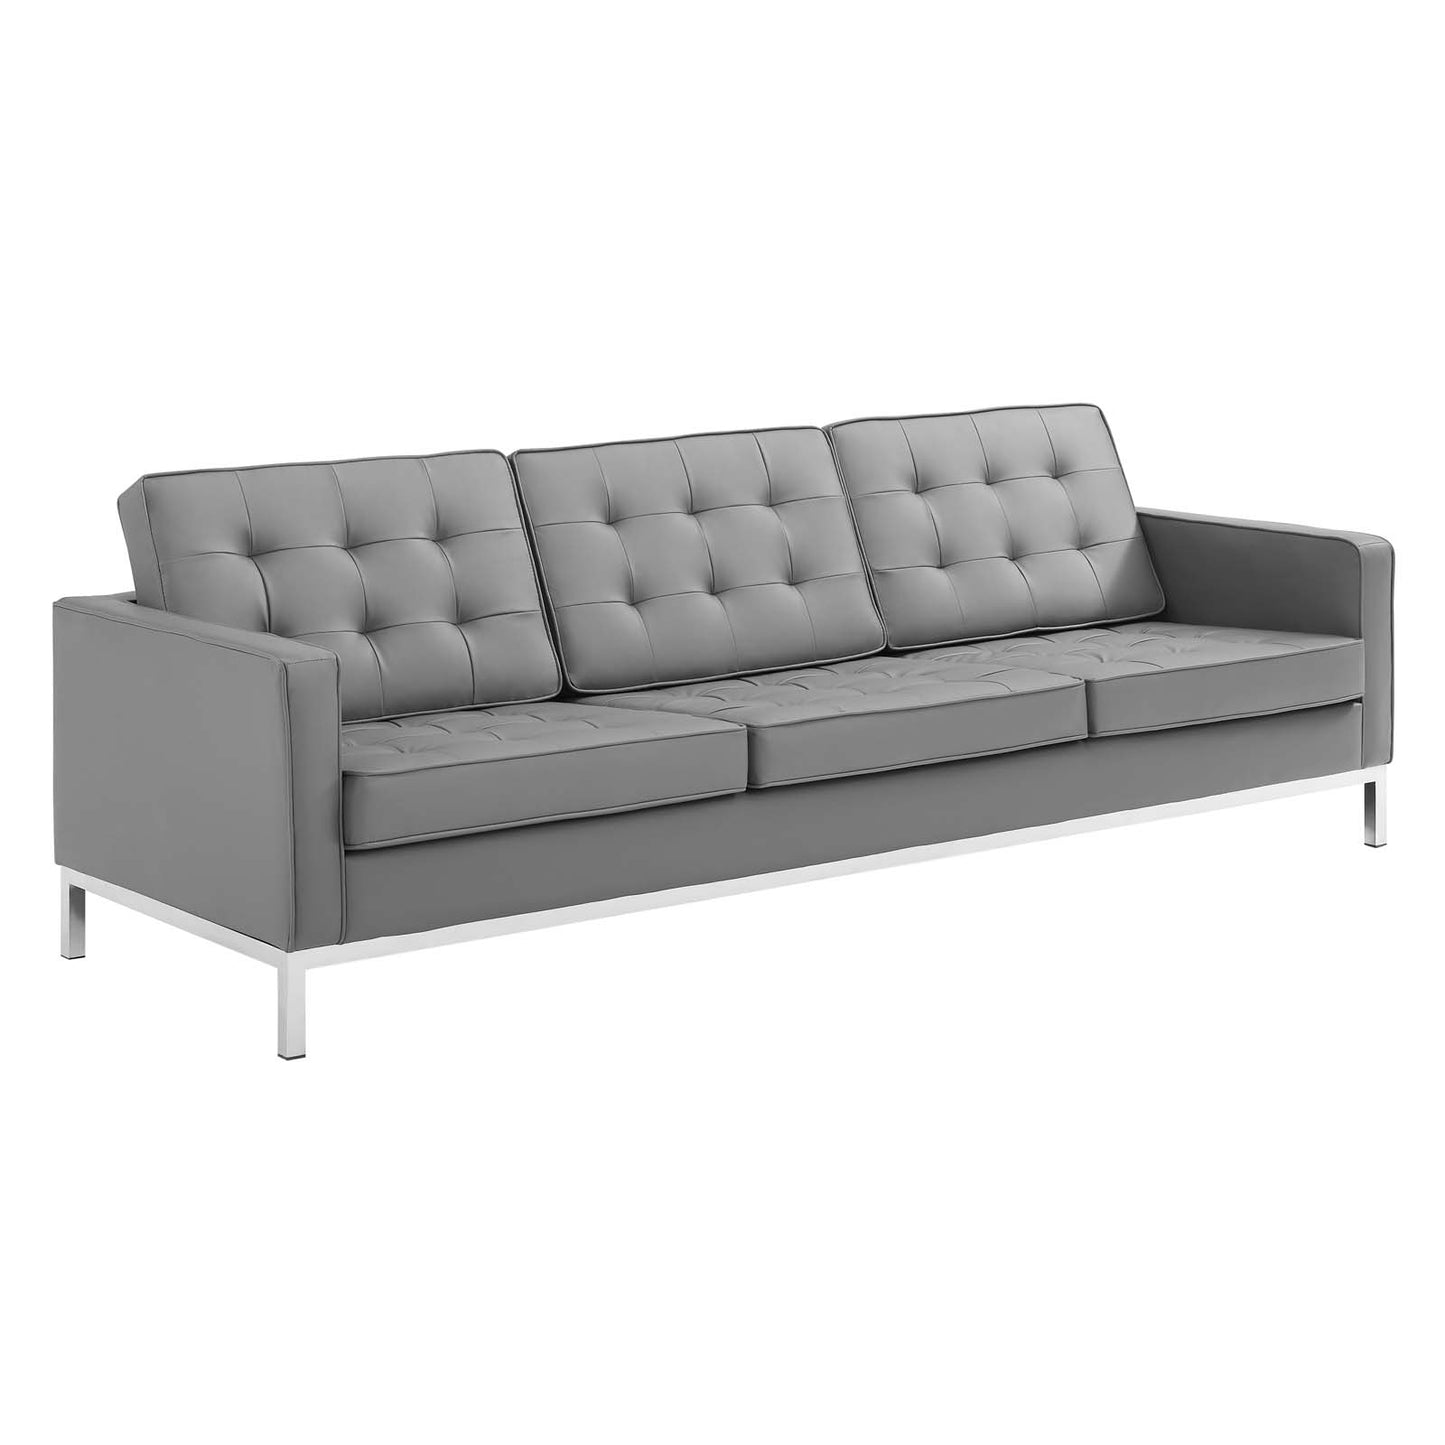 Loft Tufted Upholstered Faux Leather Sofa and Armchair Set Silver Gray EEI-4104-SLV-GRY-SET